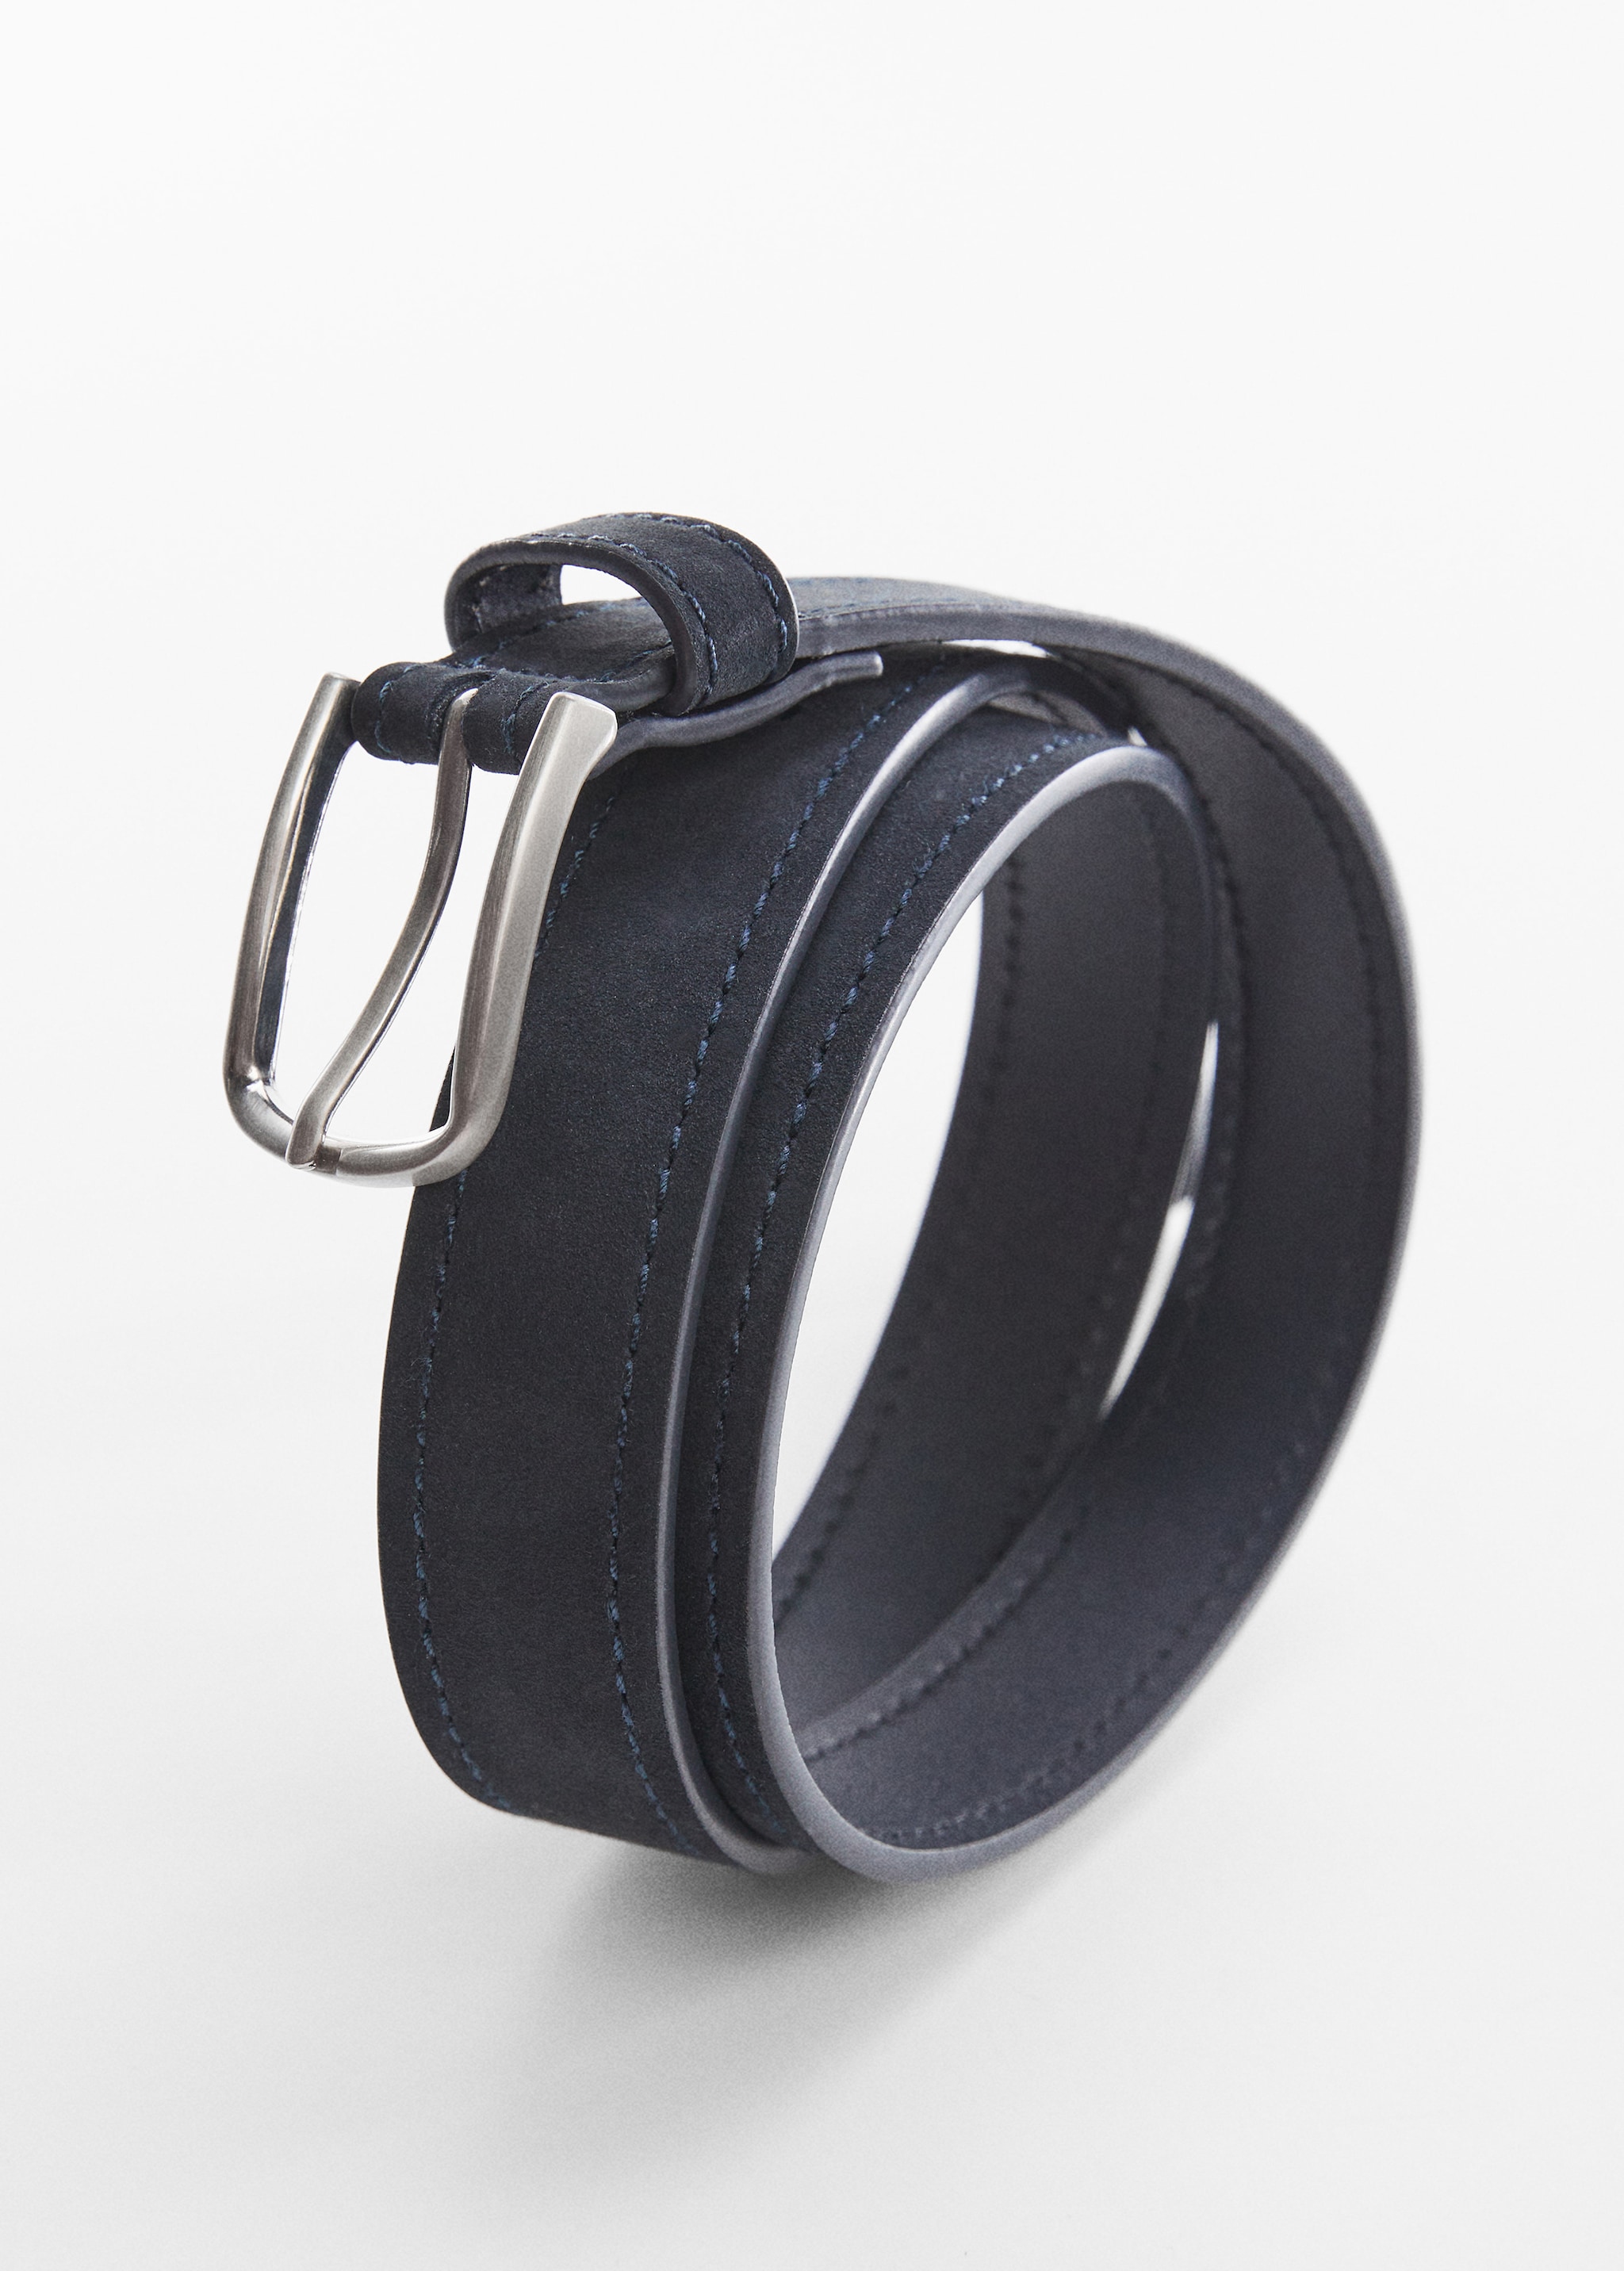 Suede leather belt - Details of the article 2